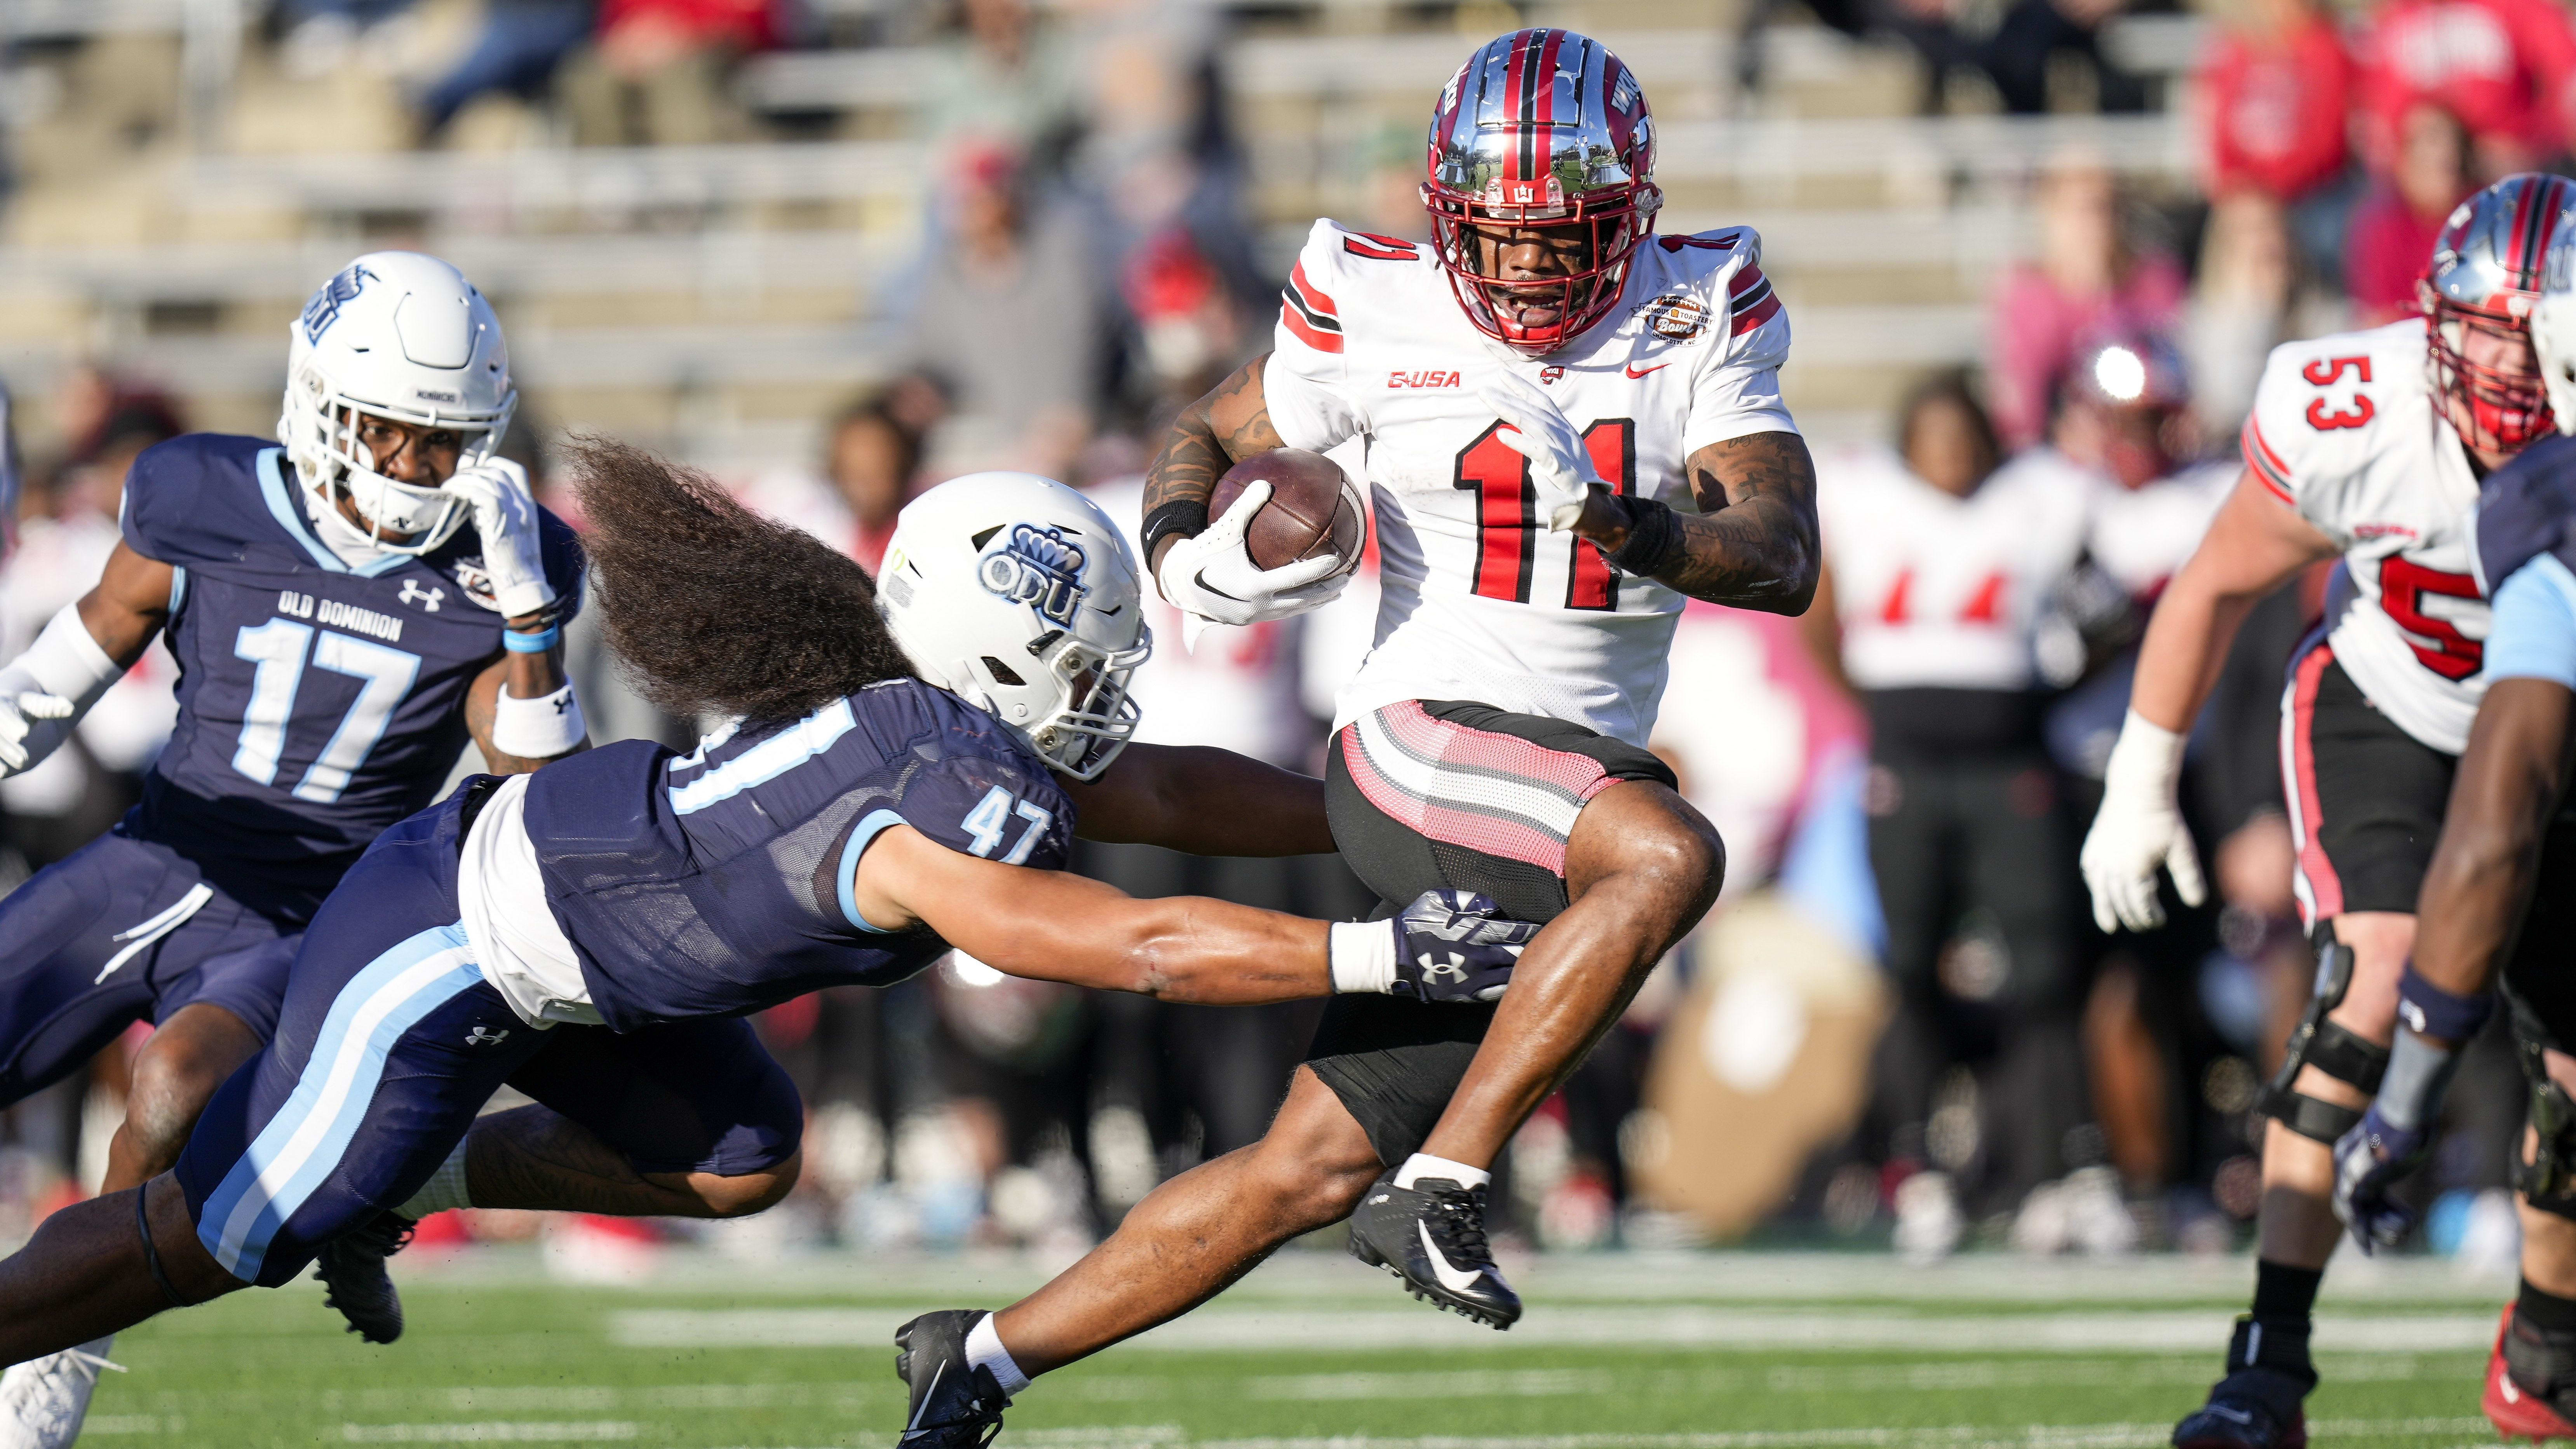 Western Kentucky Hilltoppers wide receiver Malachi Corley (11) makes a catch over the middle.